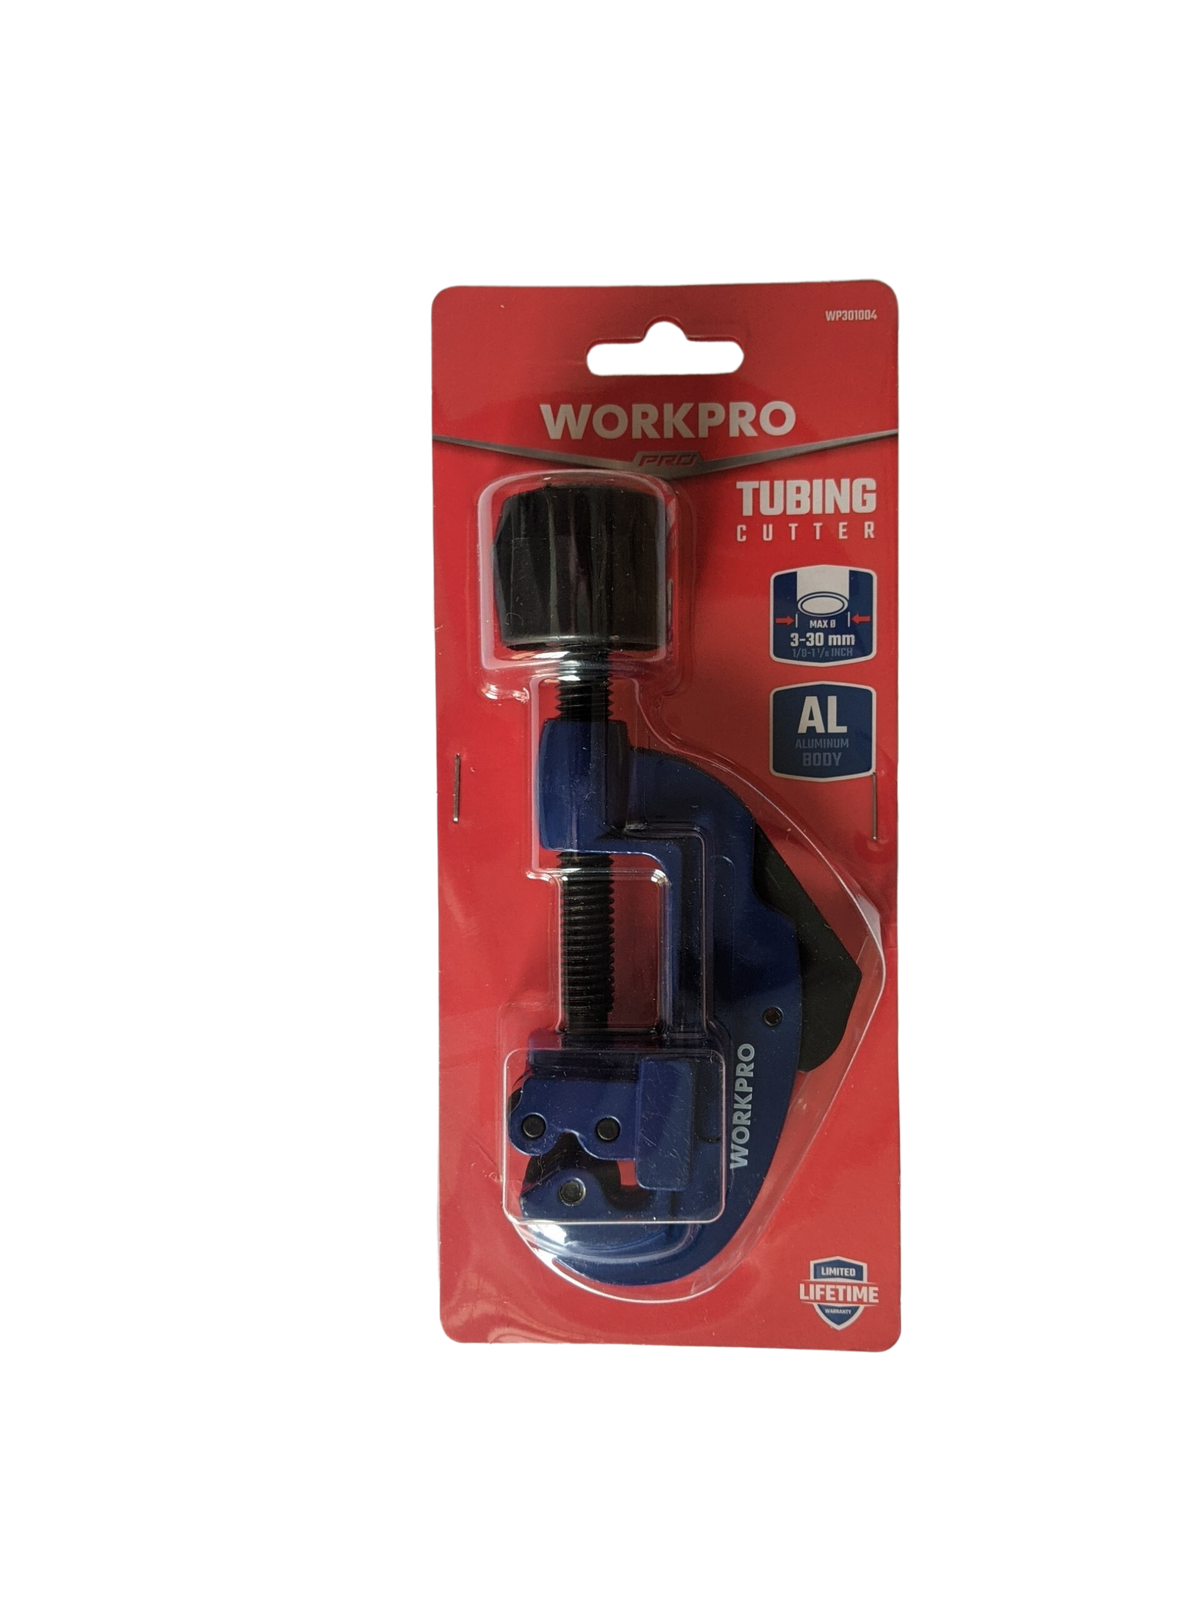 Dụng cụ cắt ống, kích thước 3-30mm (1/8 inches-1-1/8 inches) Workpro - WP301004